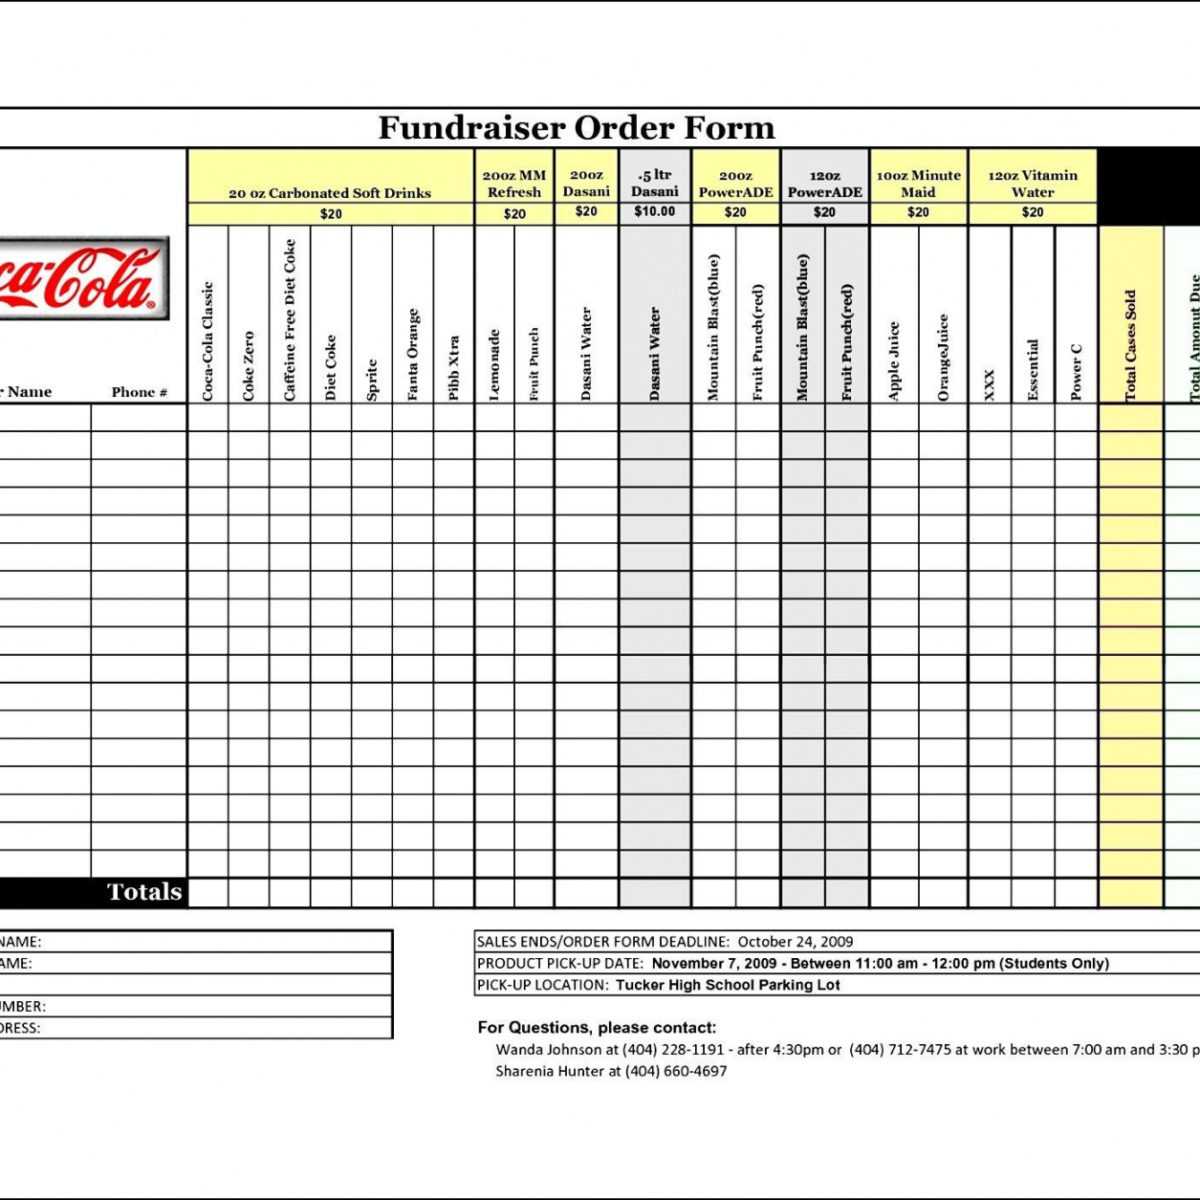 Printable 001 Fundraiser Order Form Template Incredible With Regard To Blank Fundraiser Order Form Template